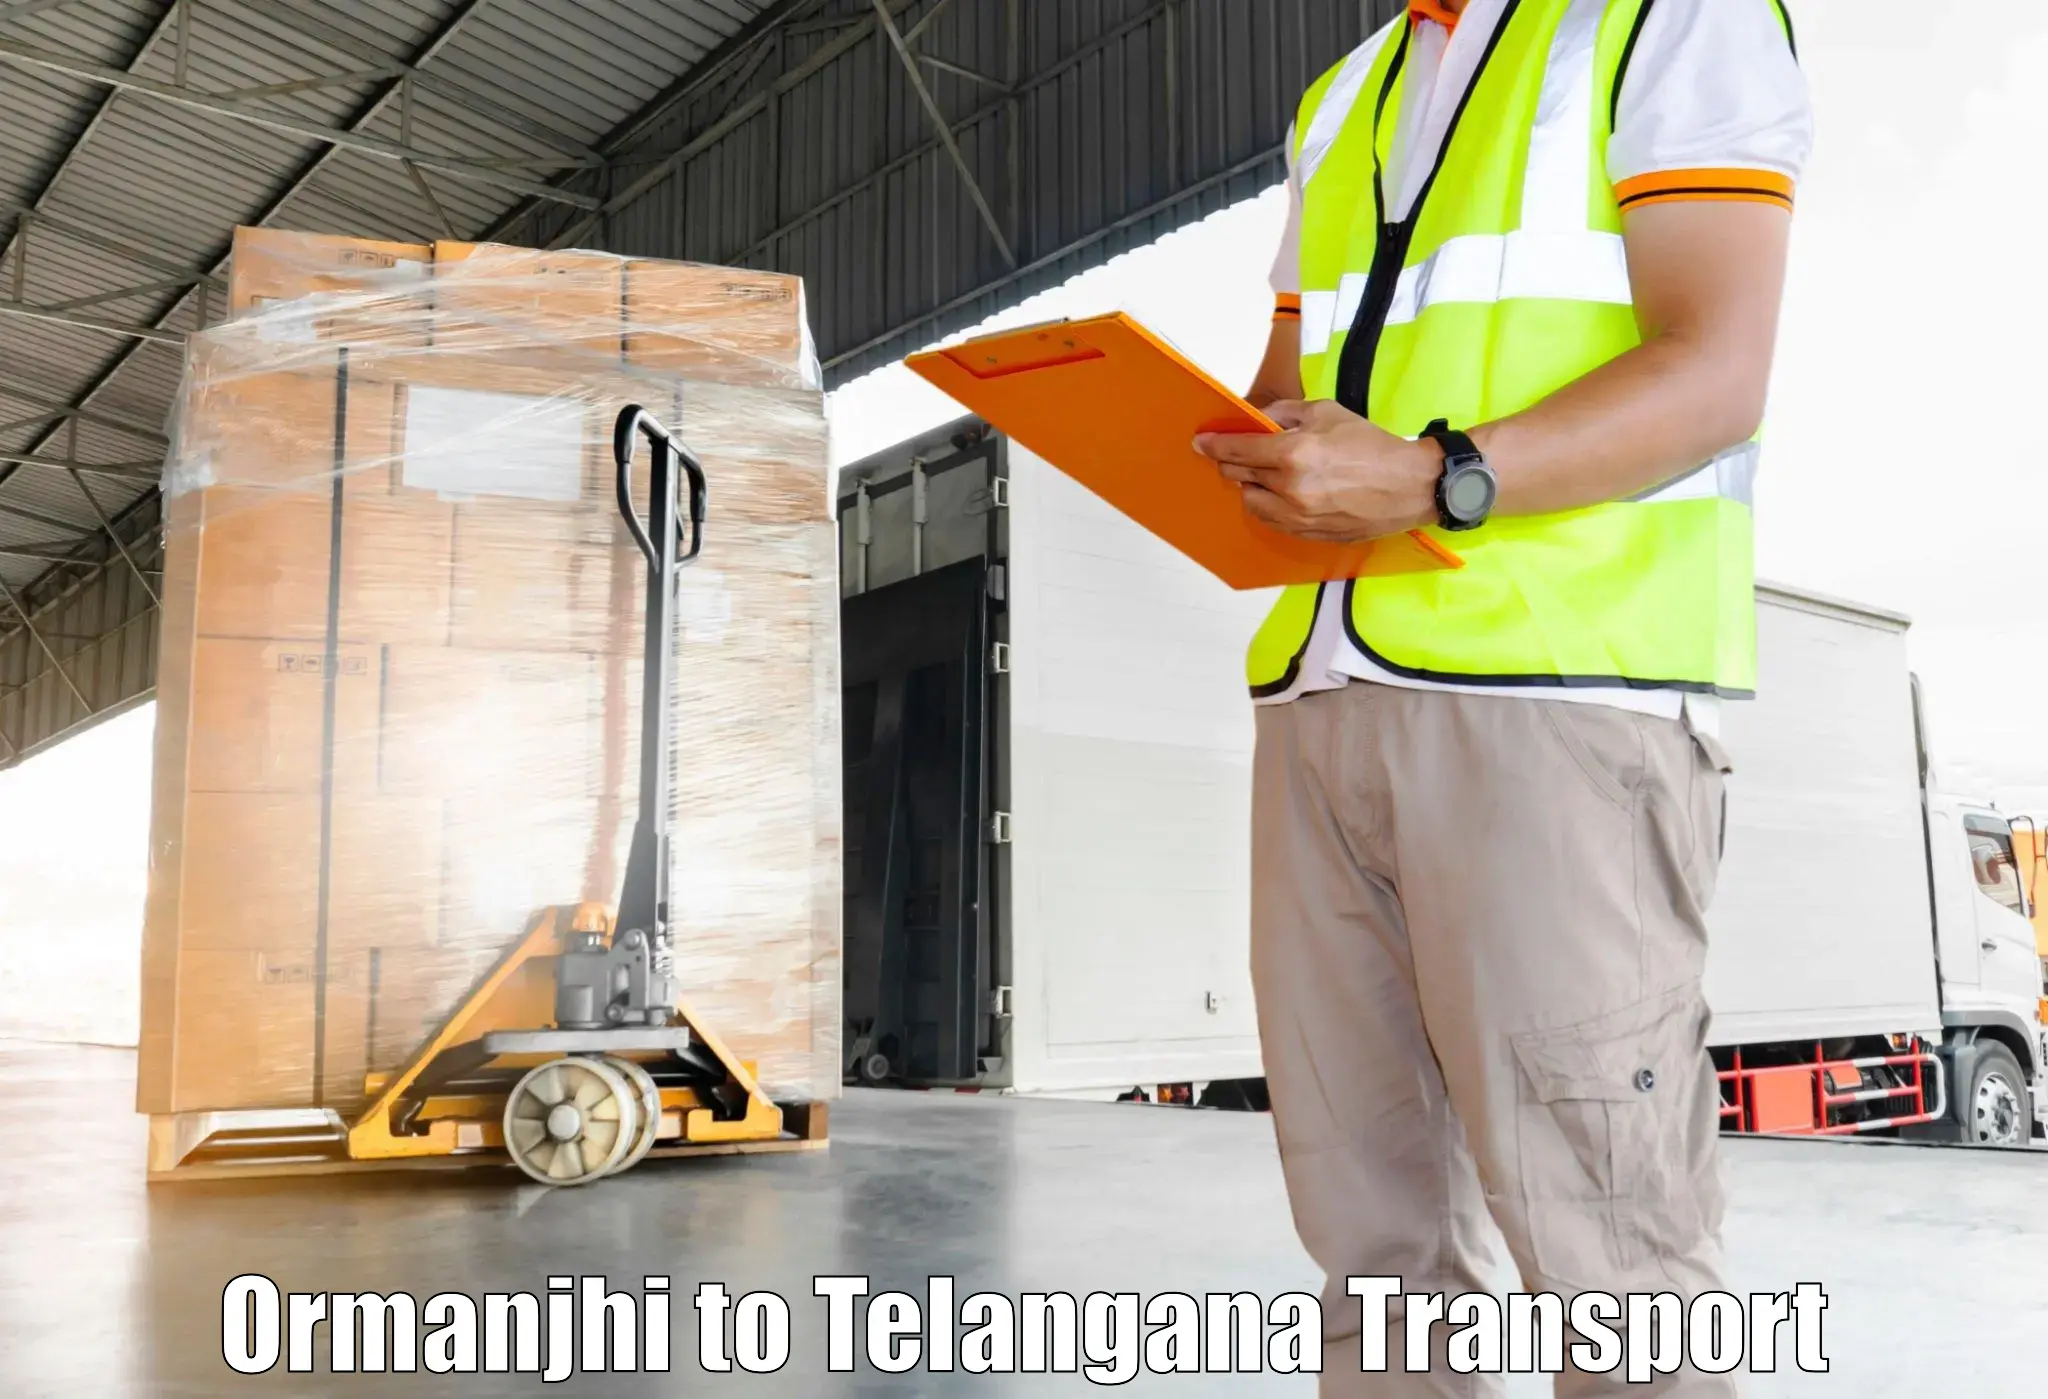 Container transport service Ormanjhi to Gangadhara